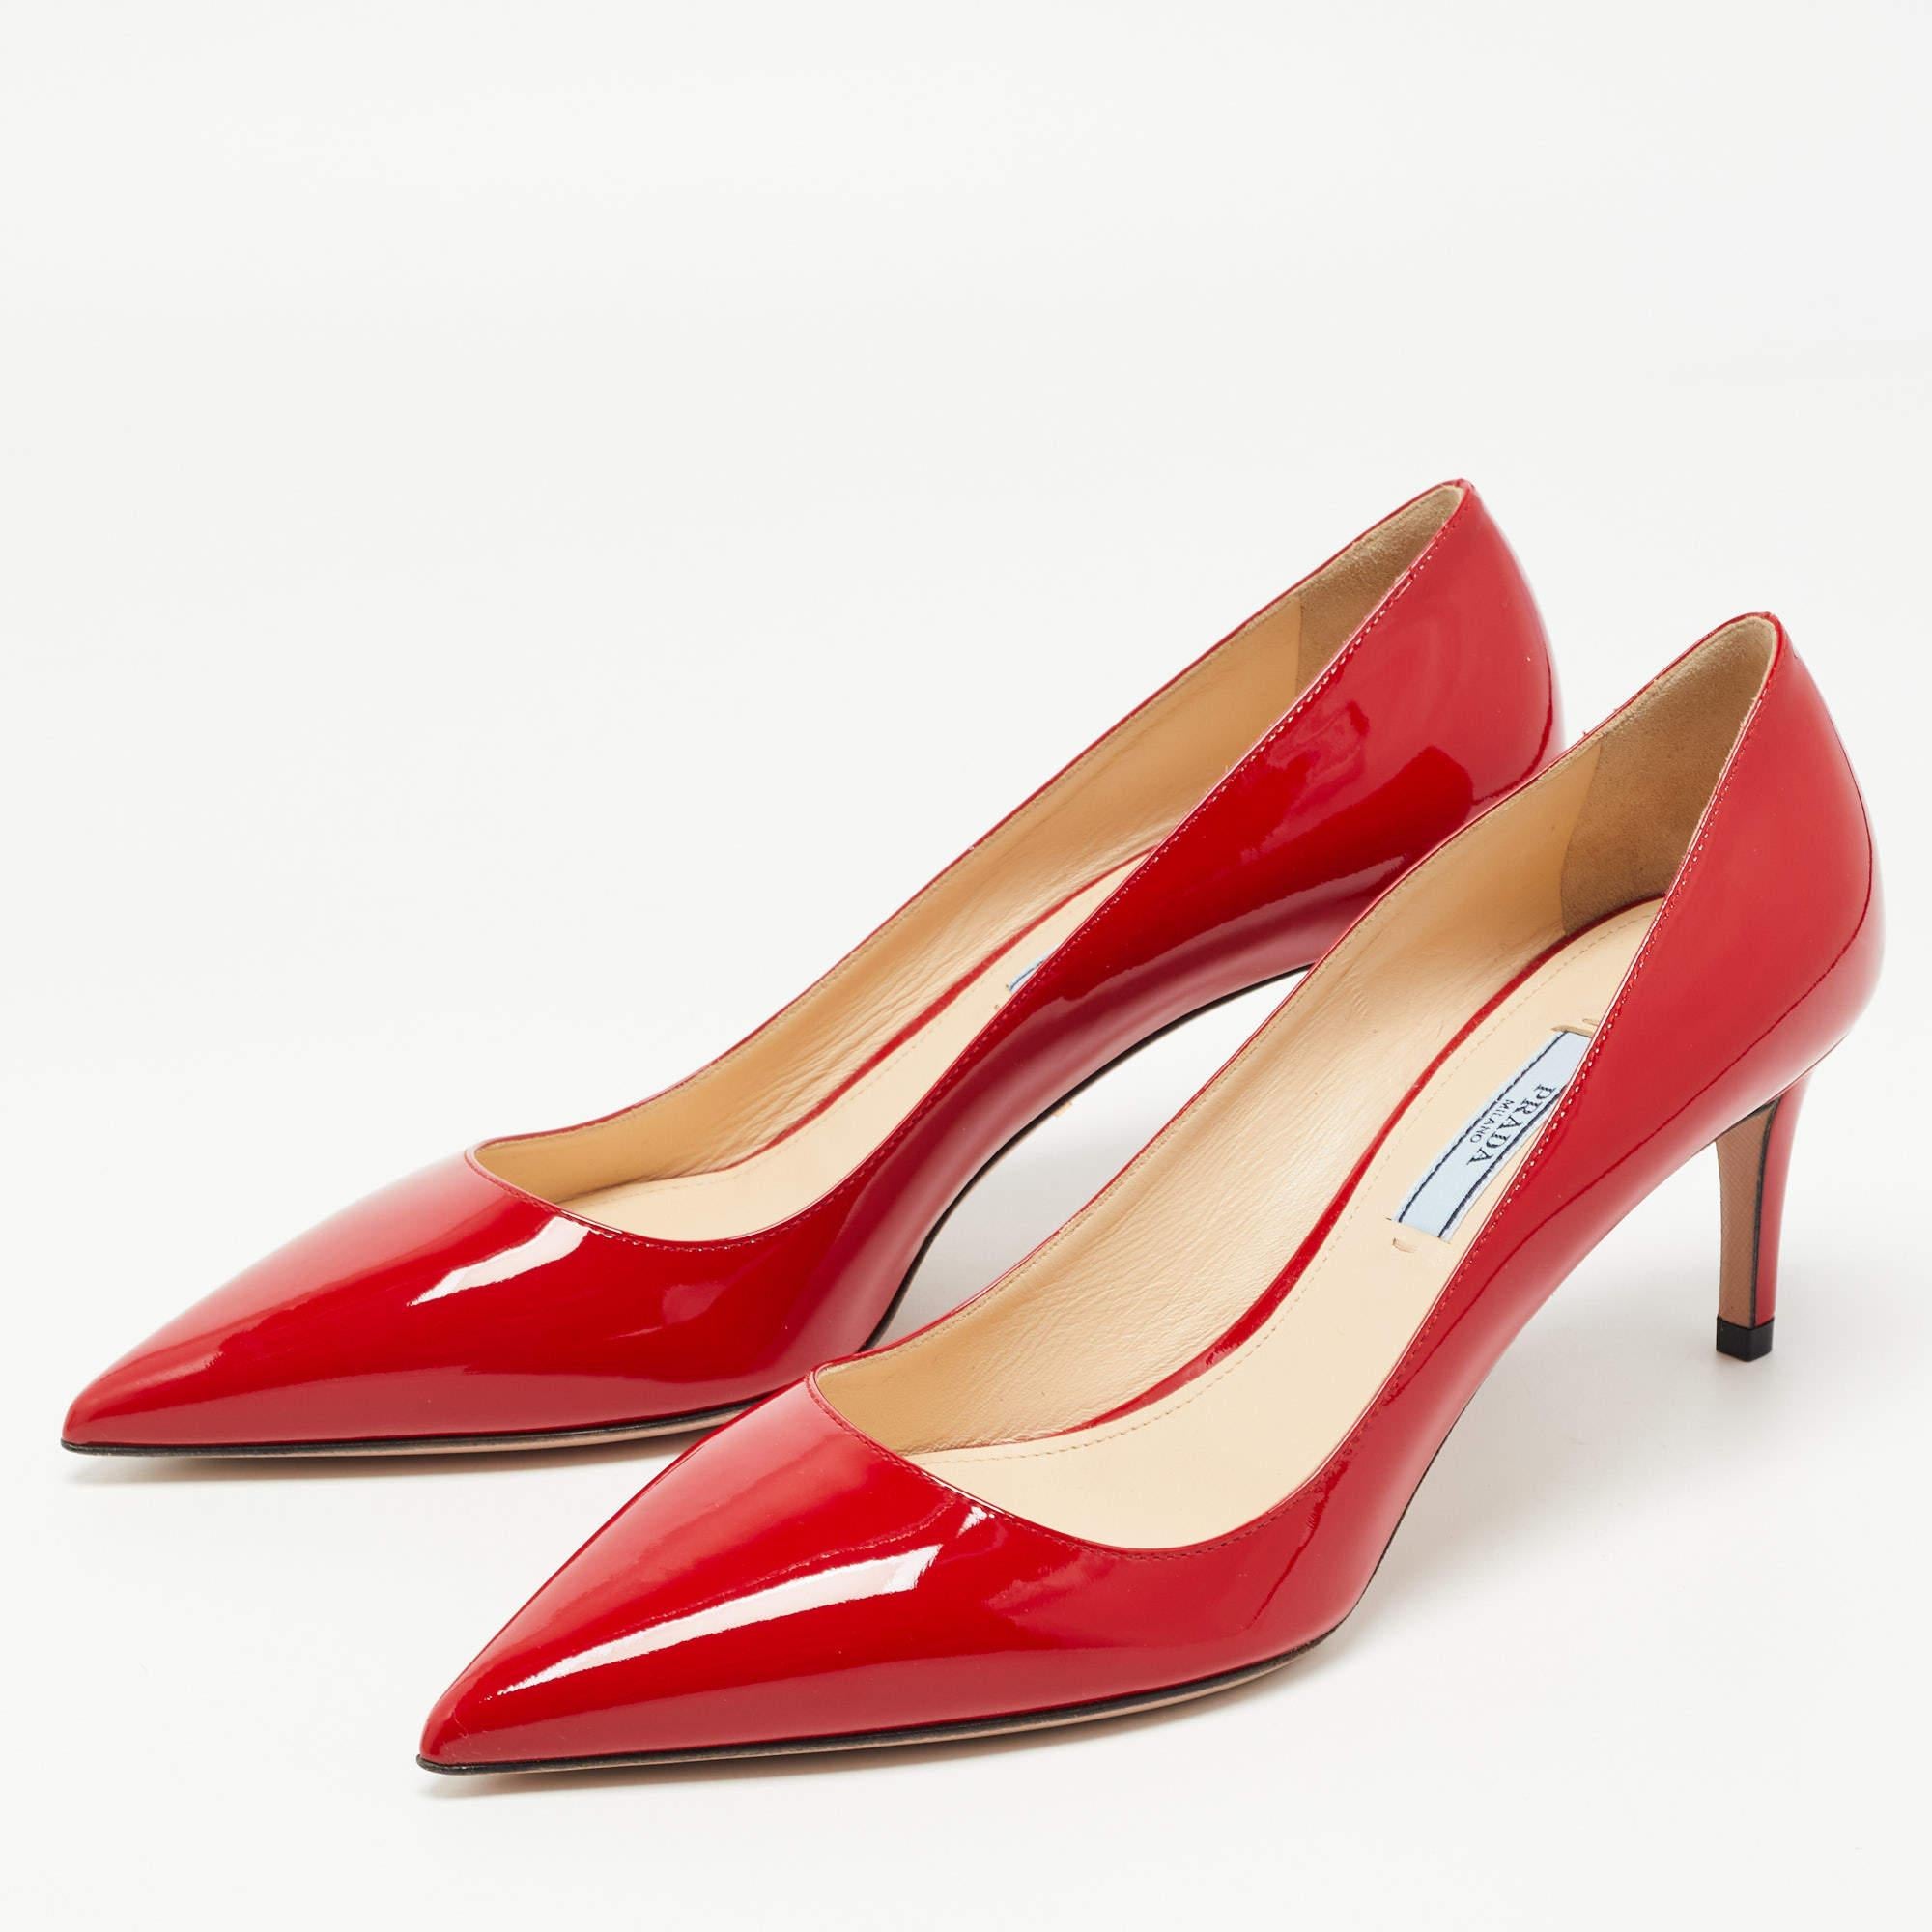 Women's Prada Red Patent Leather Pointed Toe Pumps Size 40